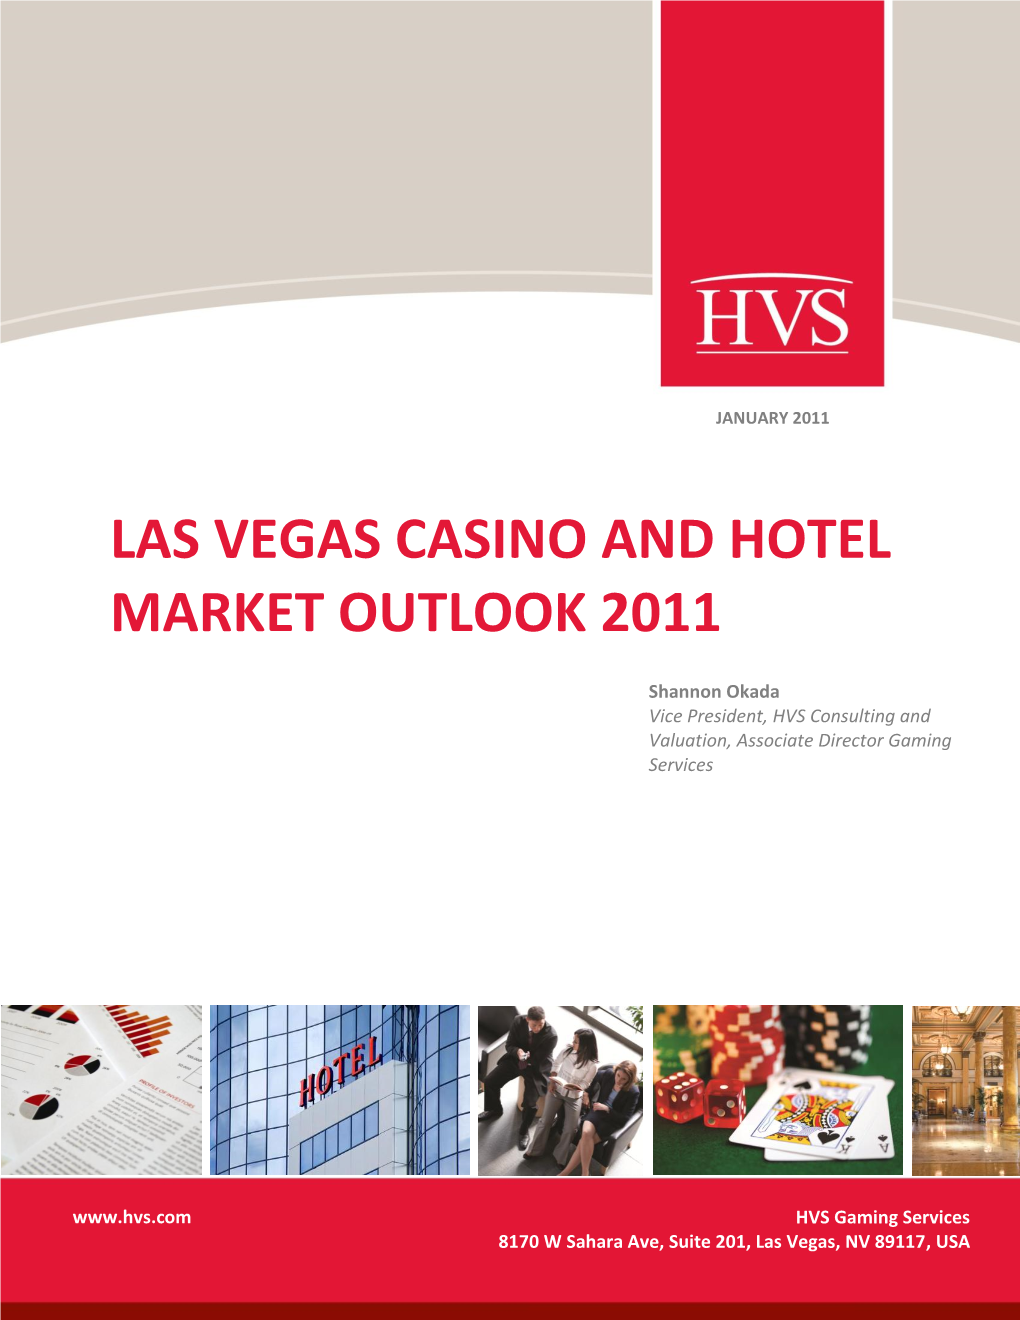 Las Vegas Casino and Hotel Market Outlook 2011